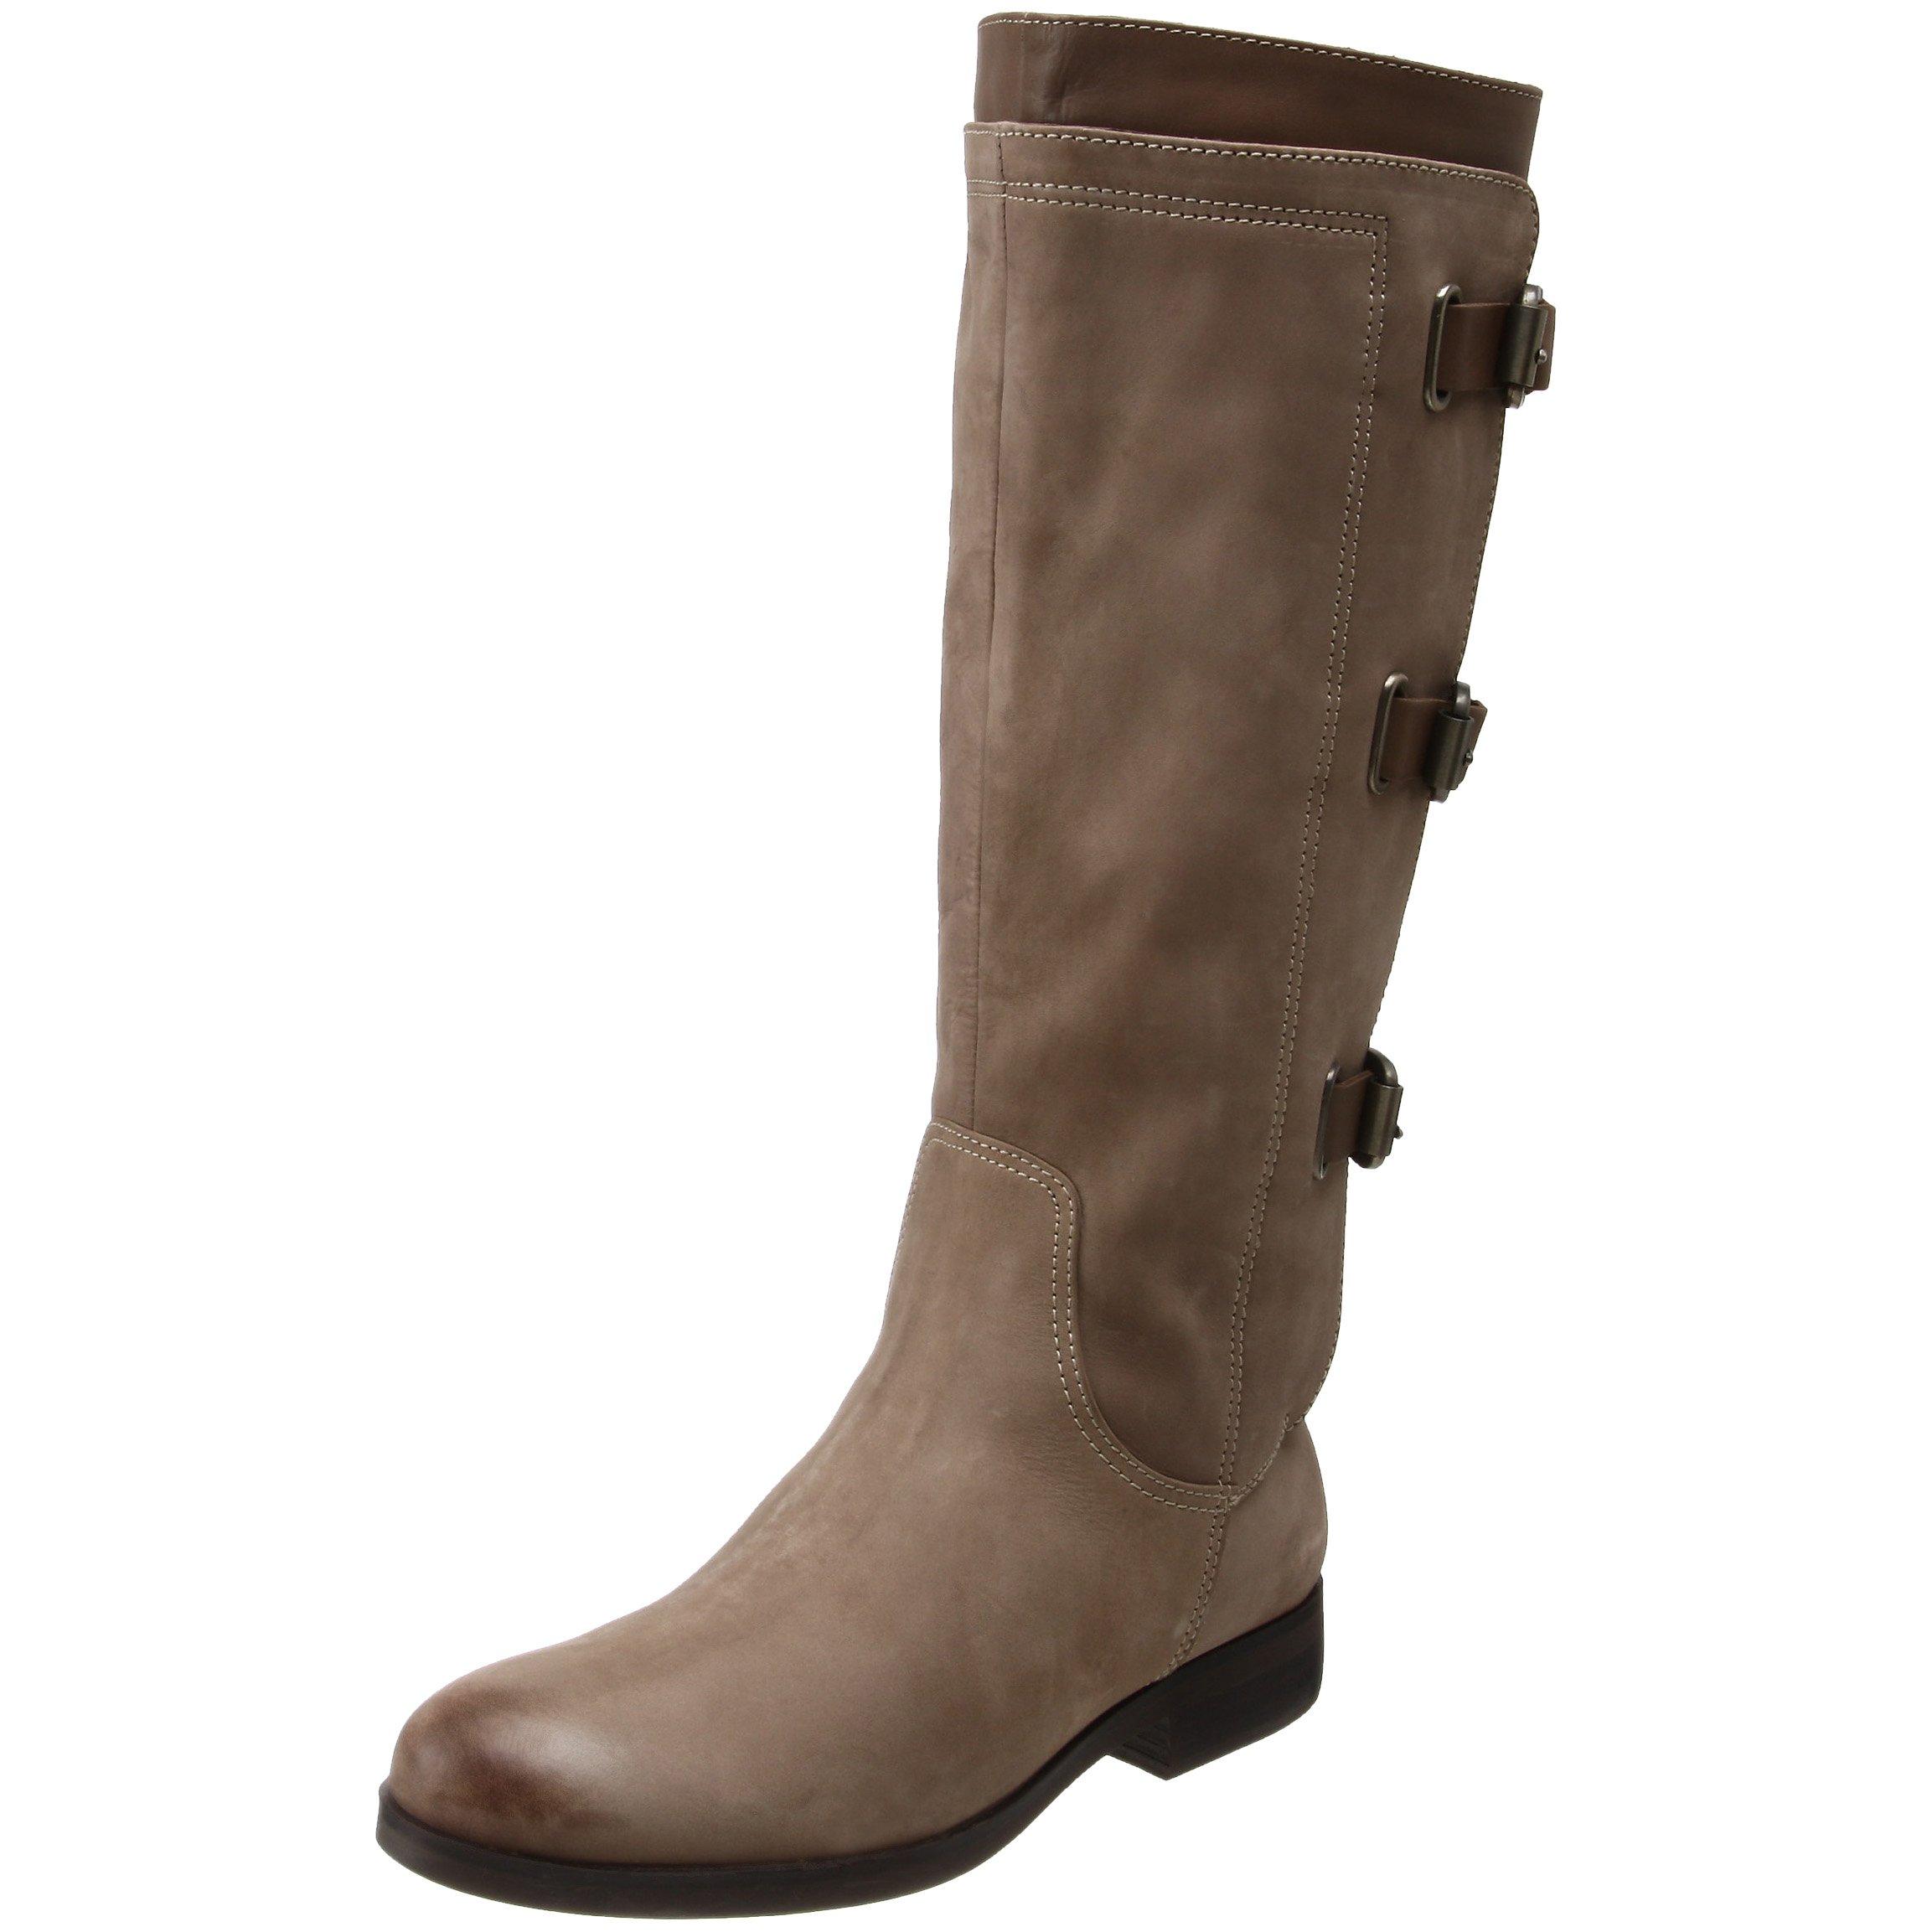 Geox Donna Alanis Boot,taupe,40 M Eu / 10 B(m) in Brown | Lyst